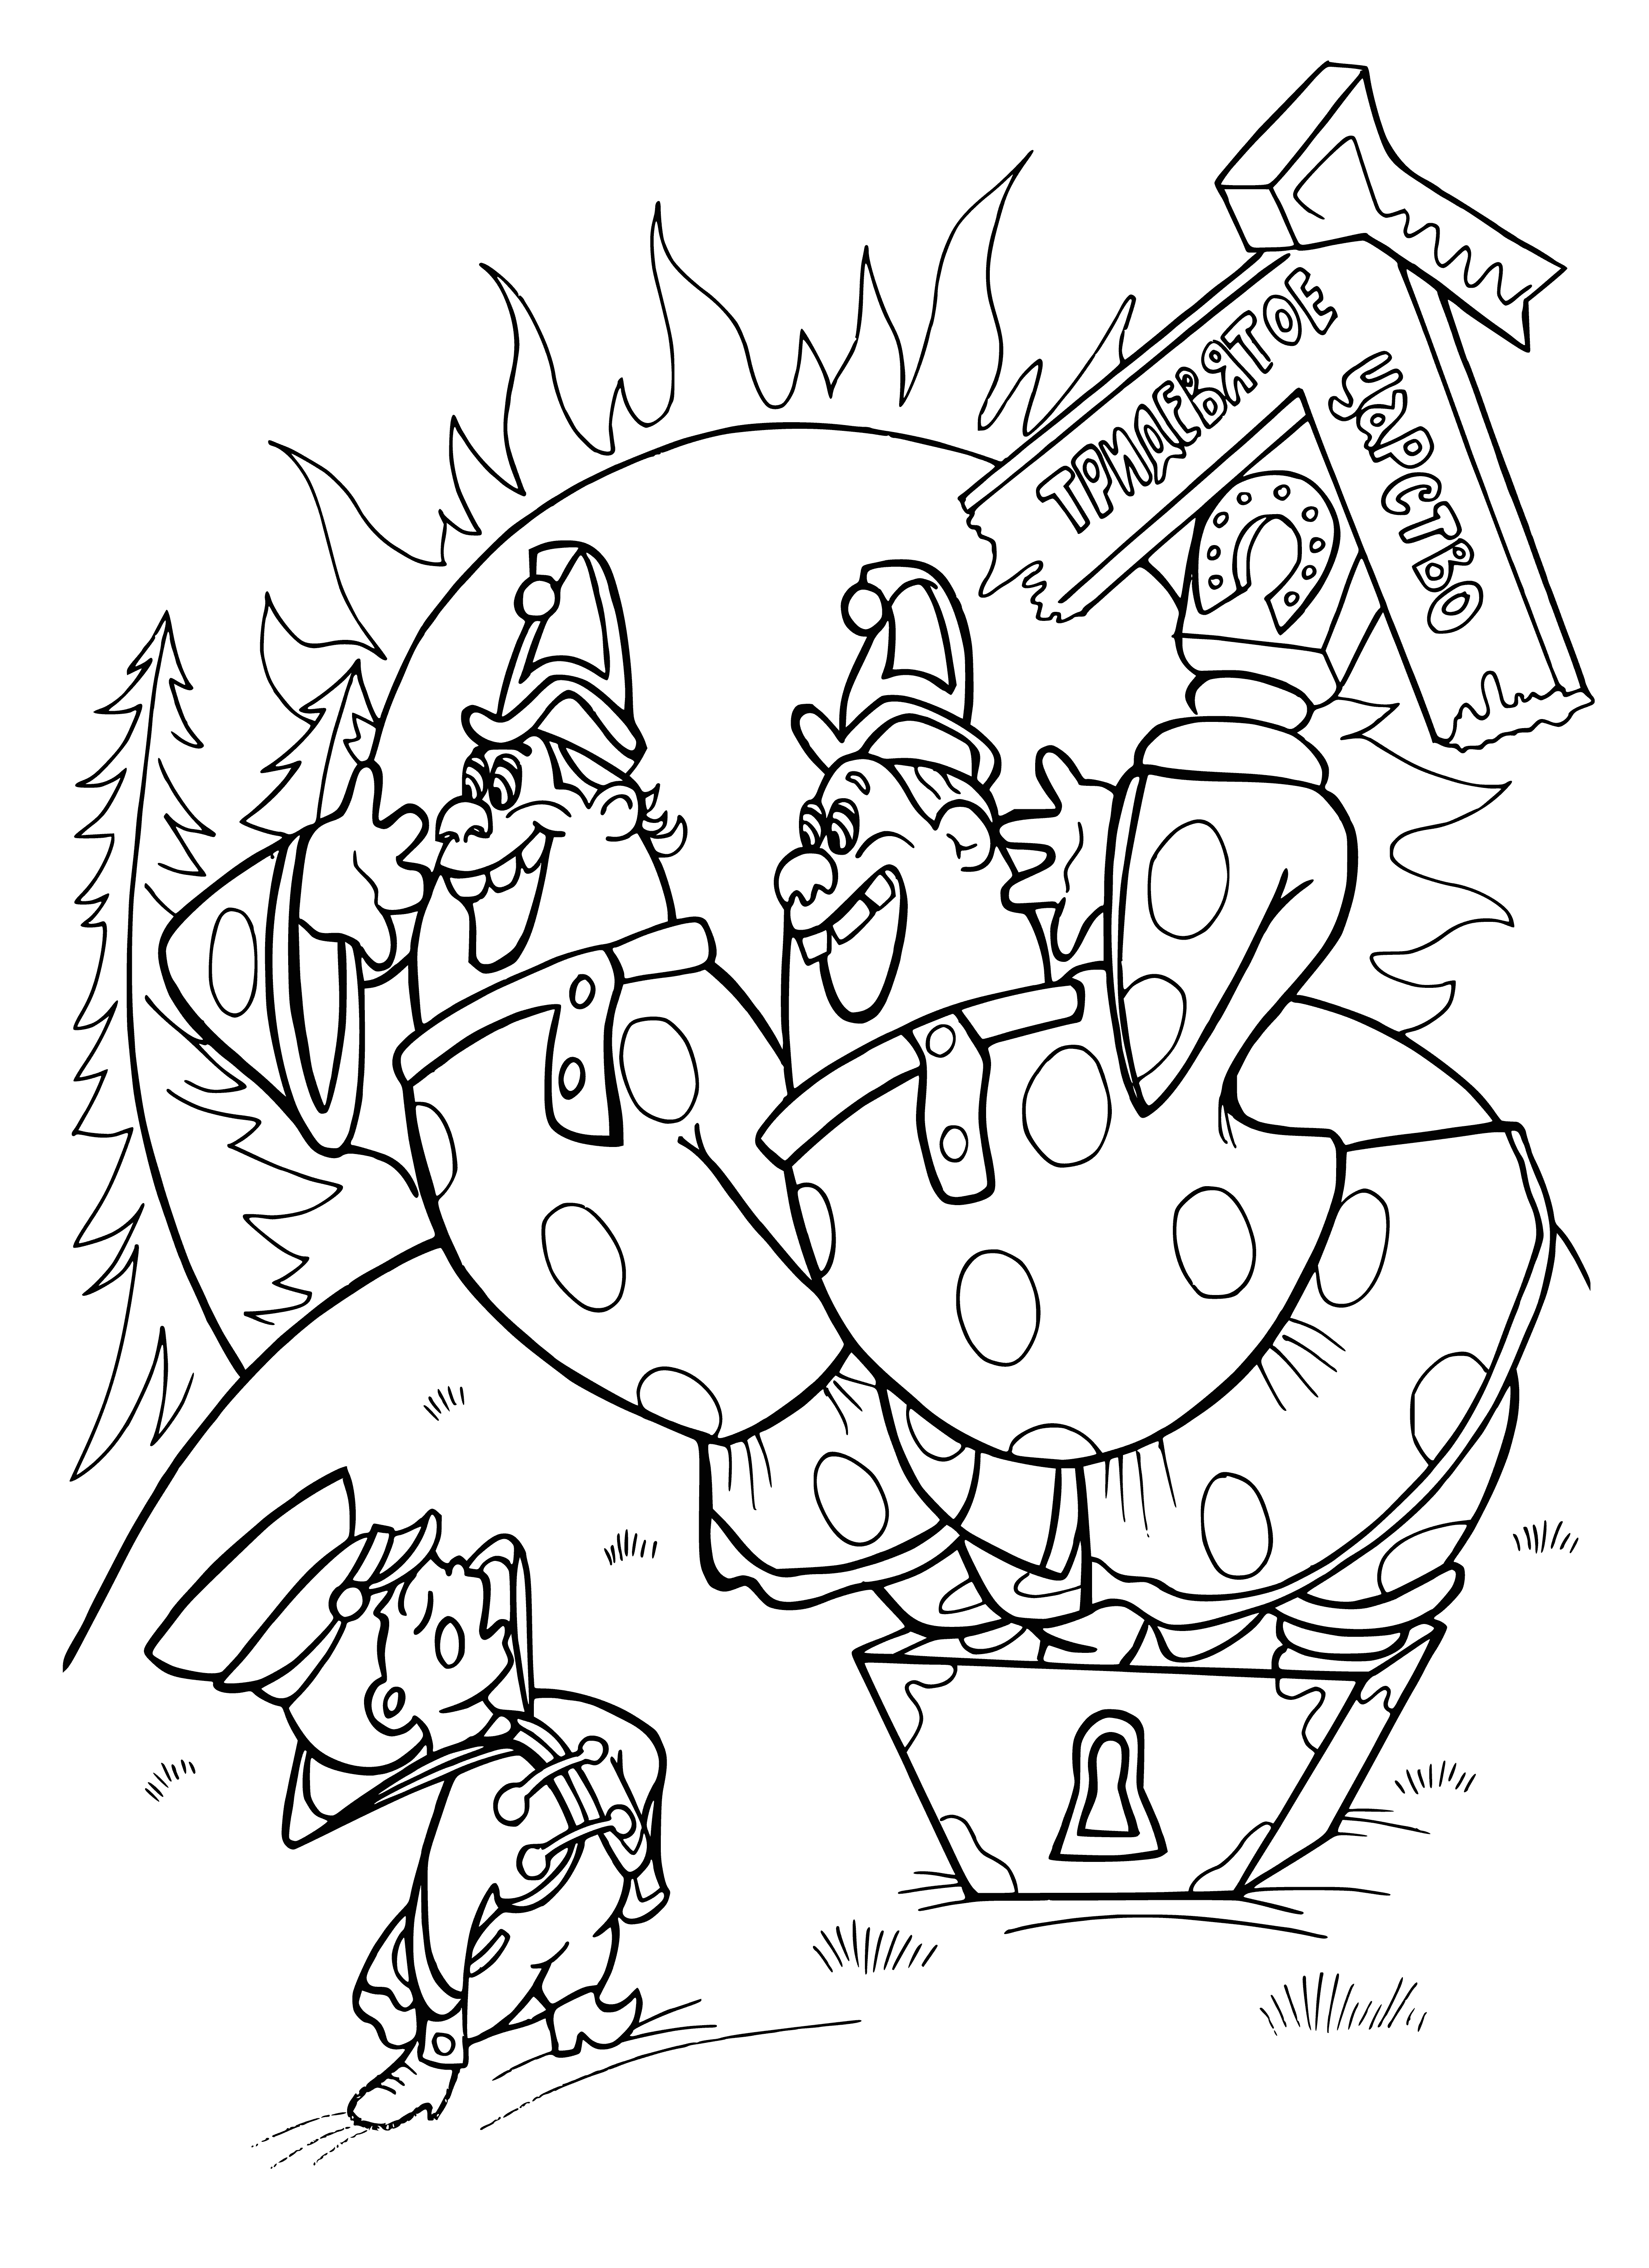 coloring page: Two people in traditional Vovka clothing stand in front of a large casket. She wears a floral dress & he has a geometric-designed tunic. Dark hair & olive skin complete the coloring page.